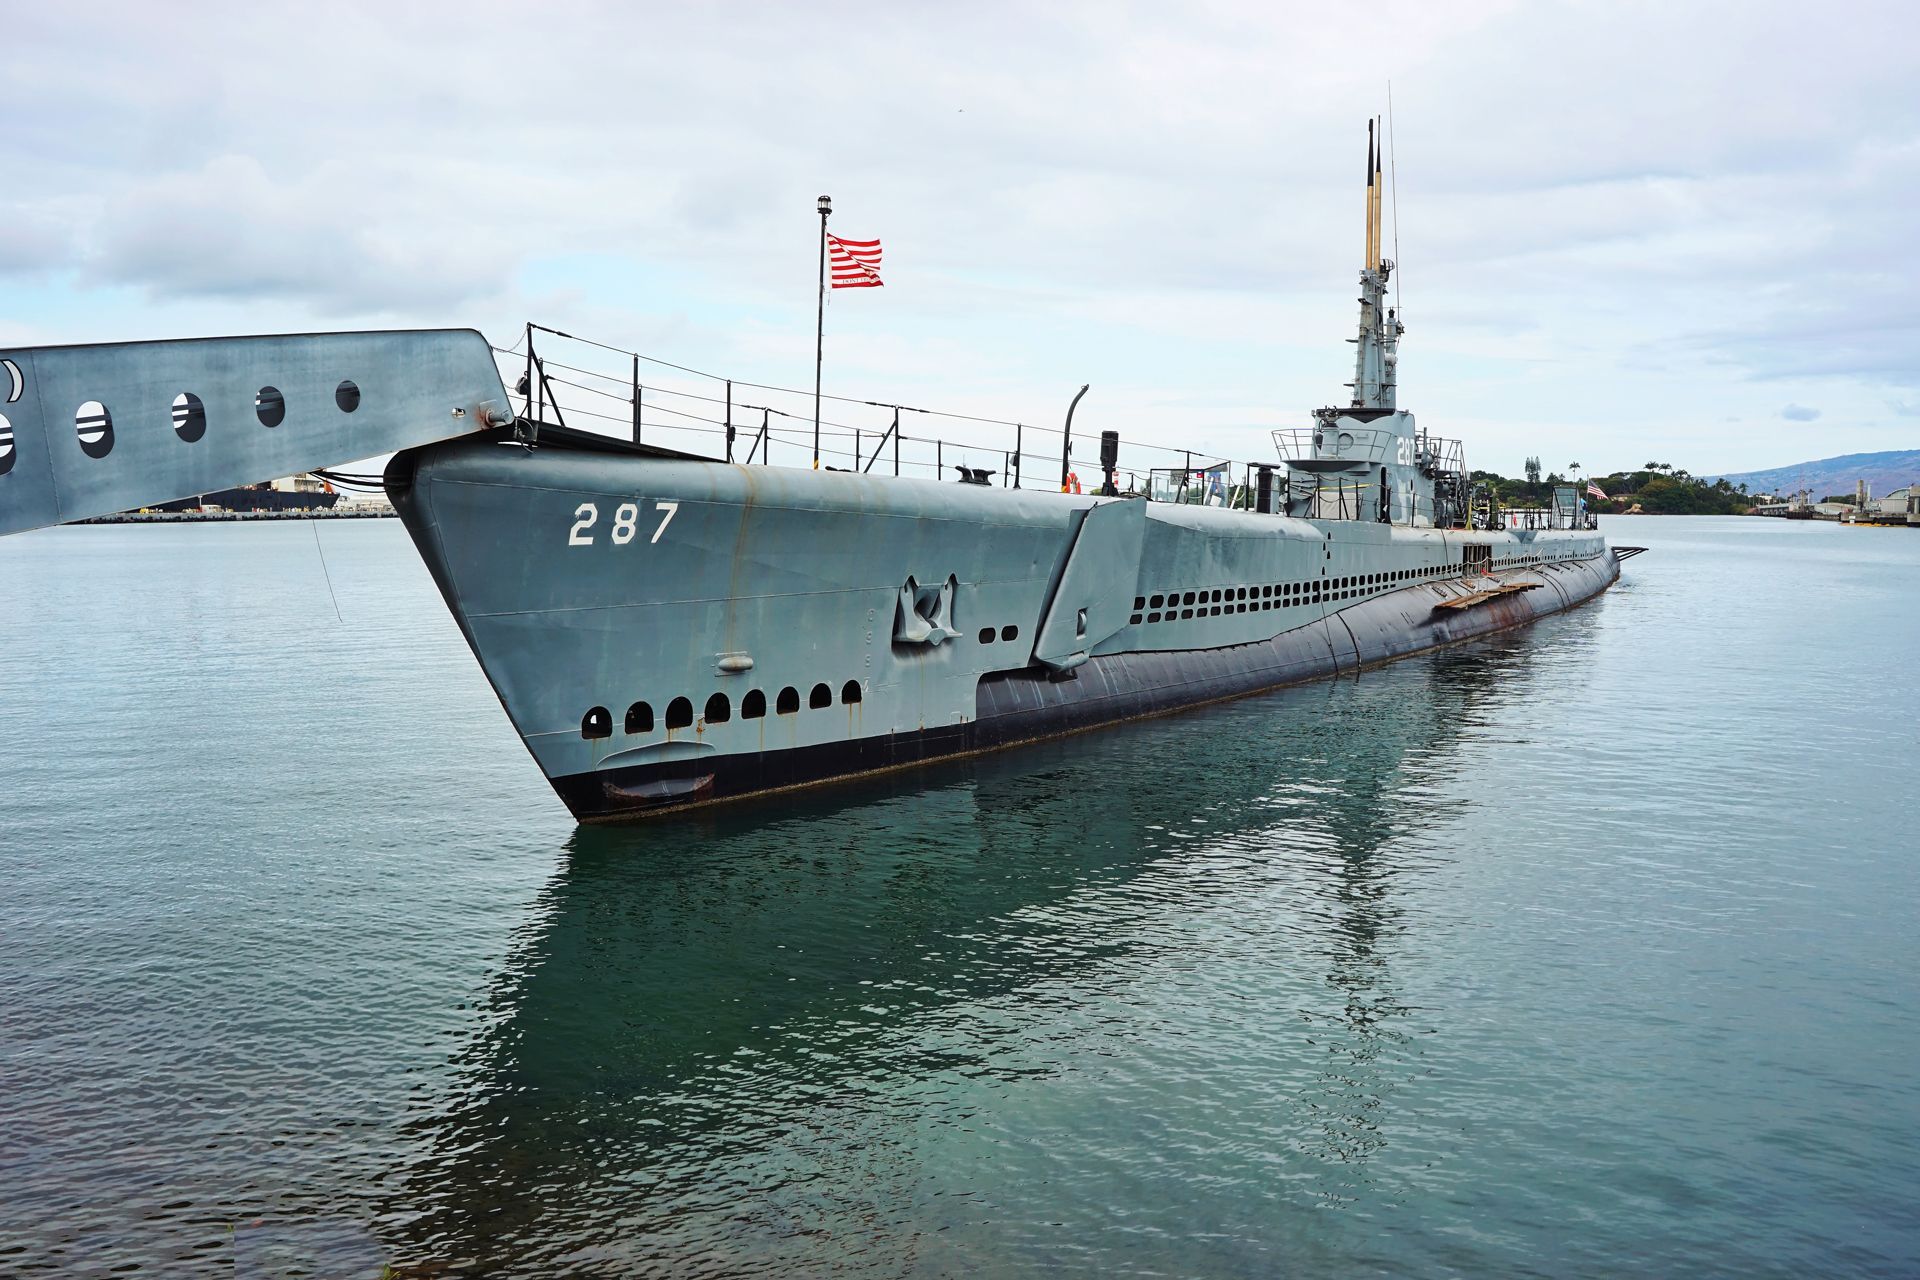 The US Bowfin Submarine